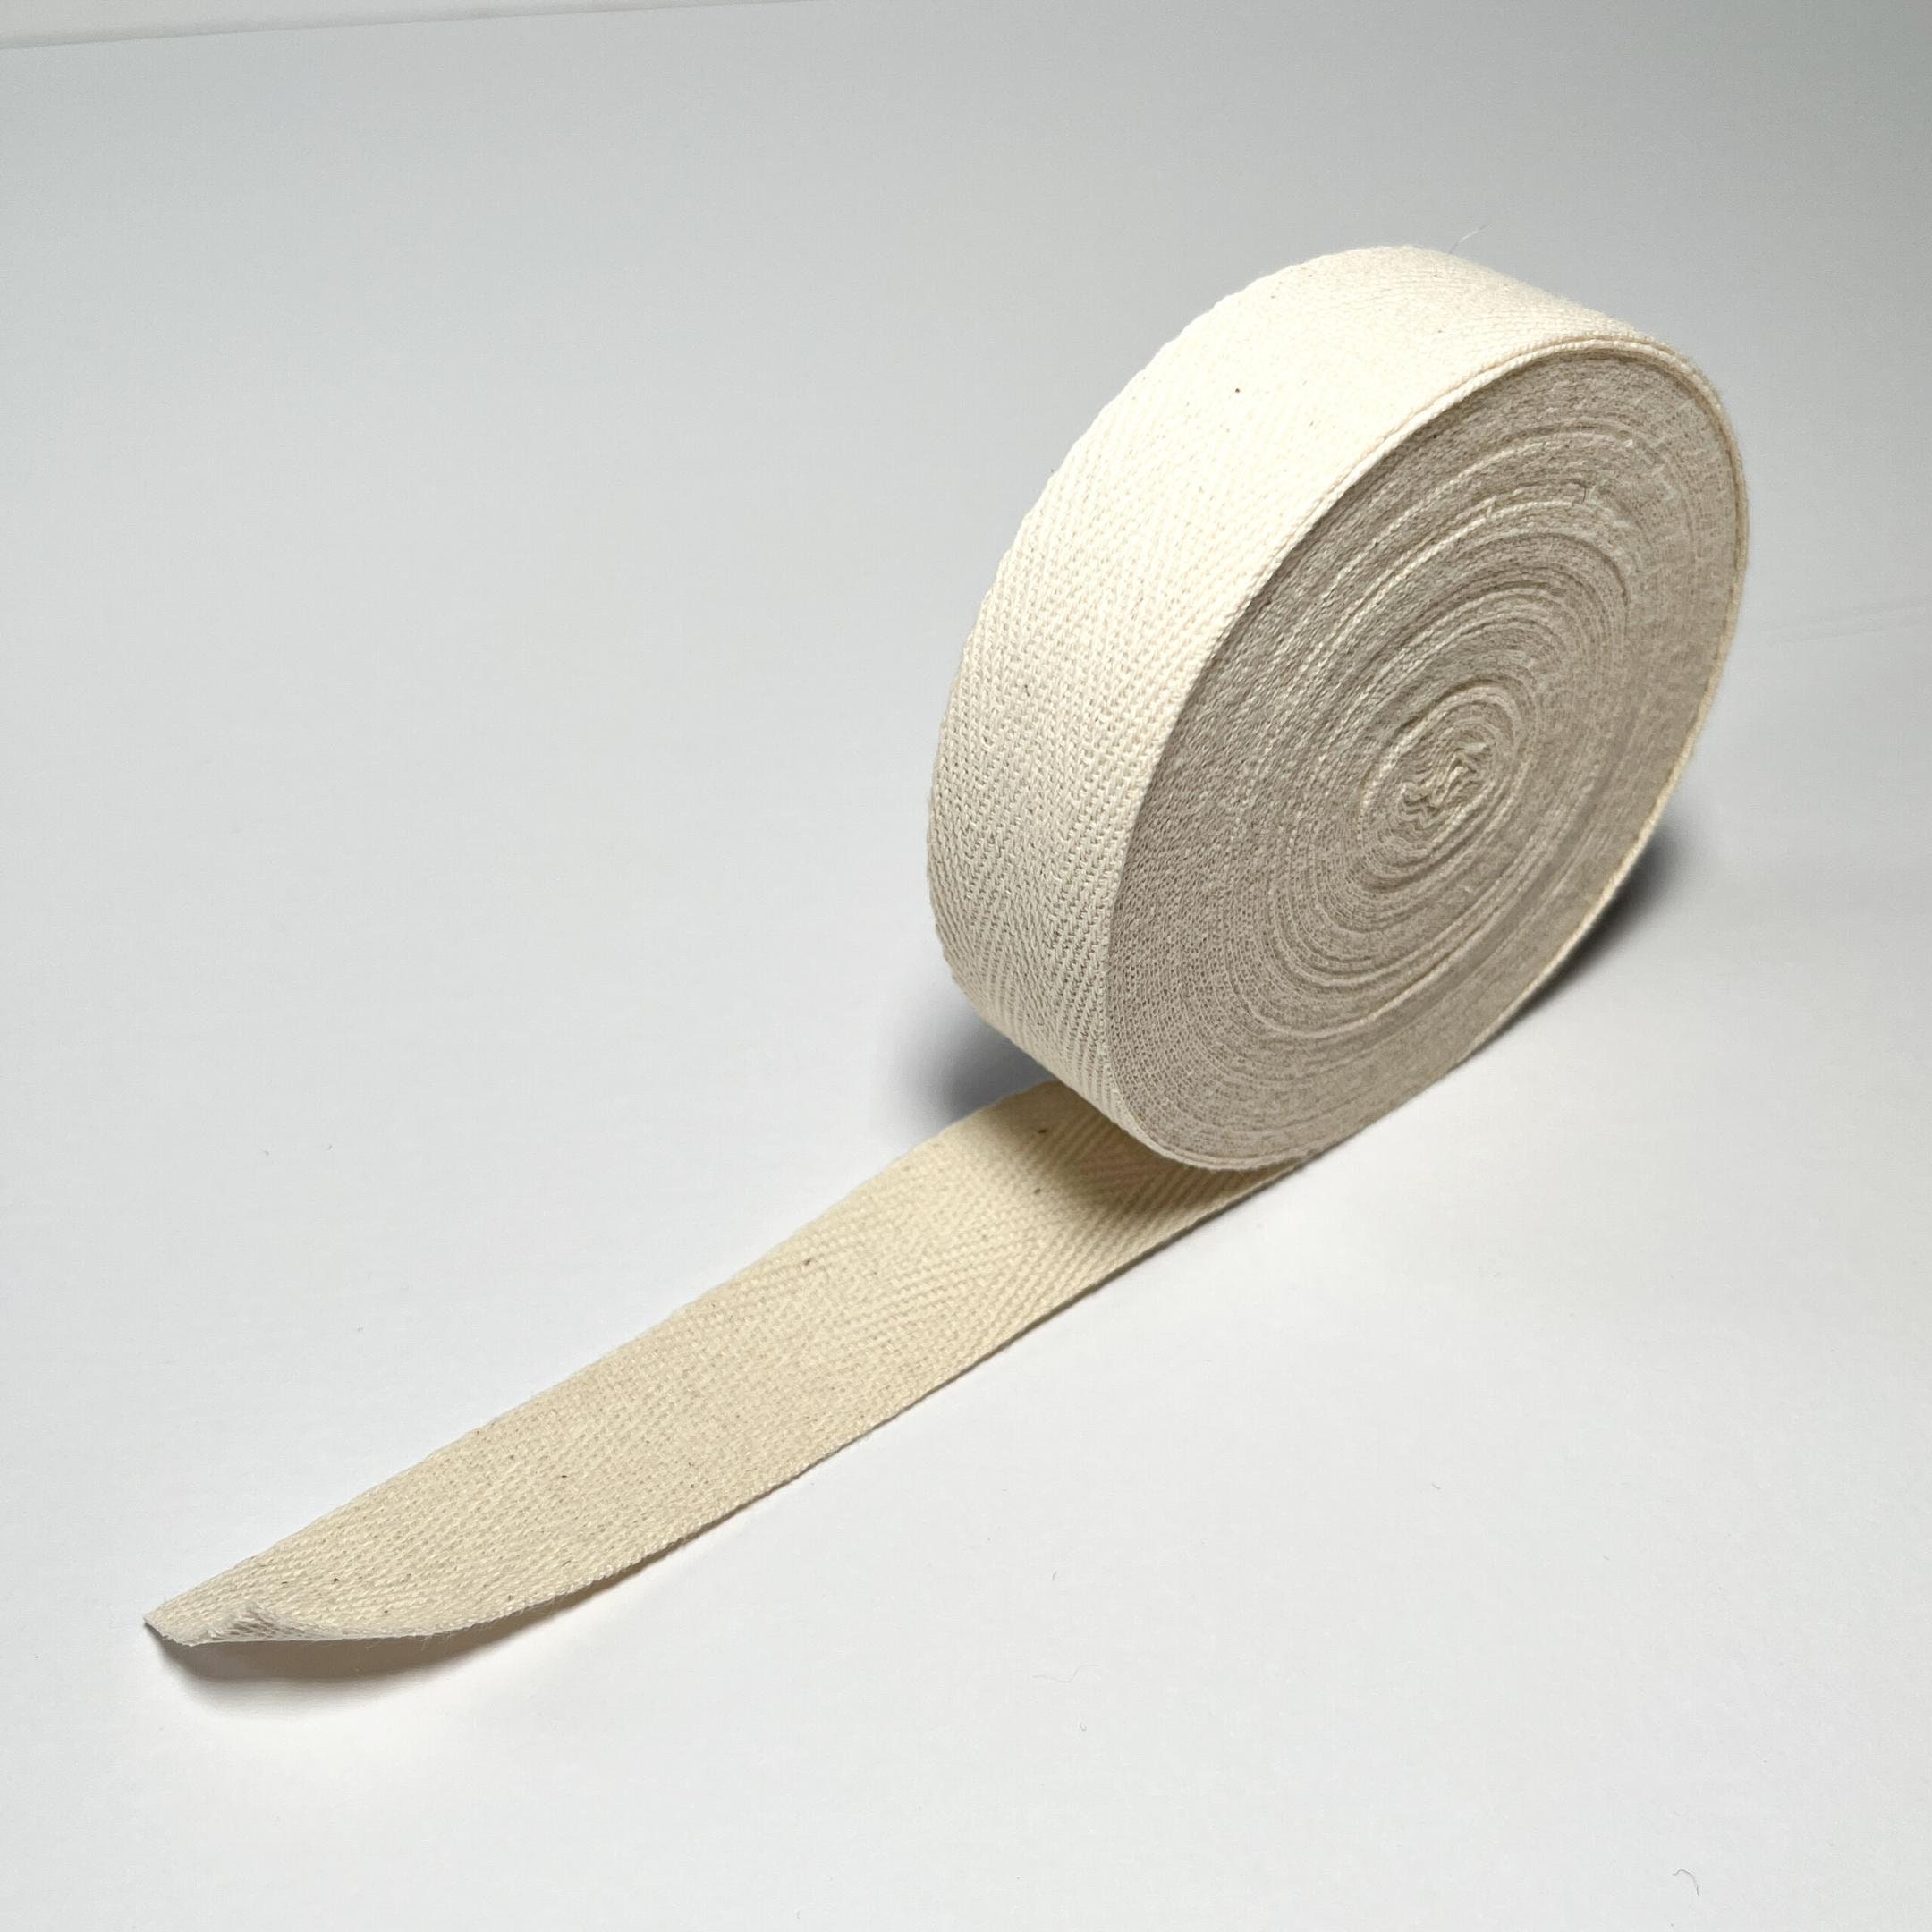 Great Deals On Flexible And Durable Wholesale carpet binding tape 